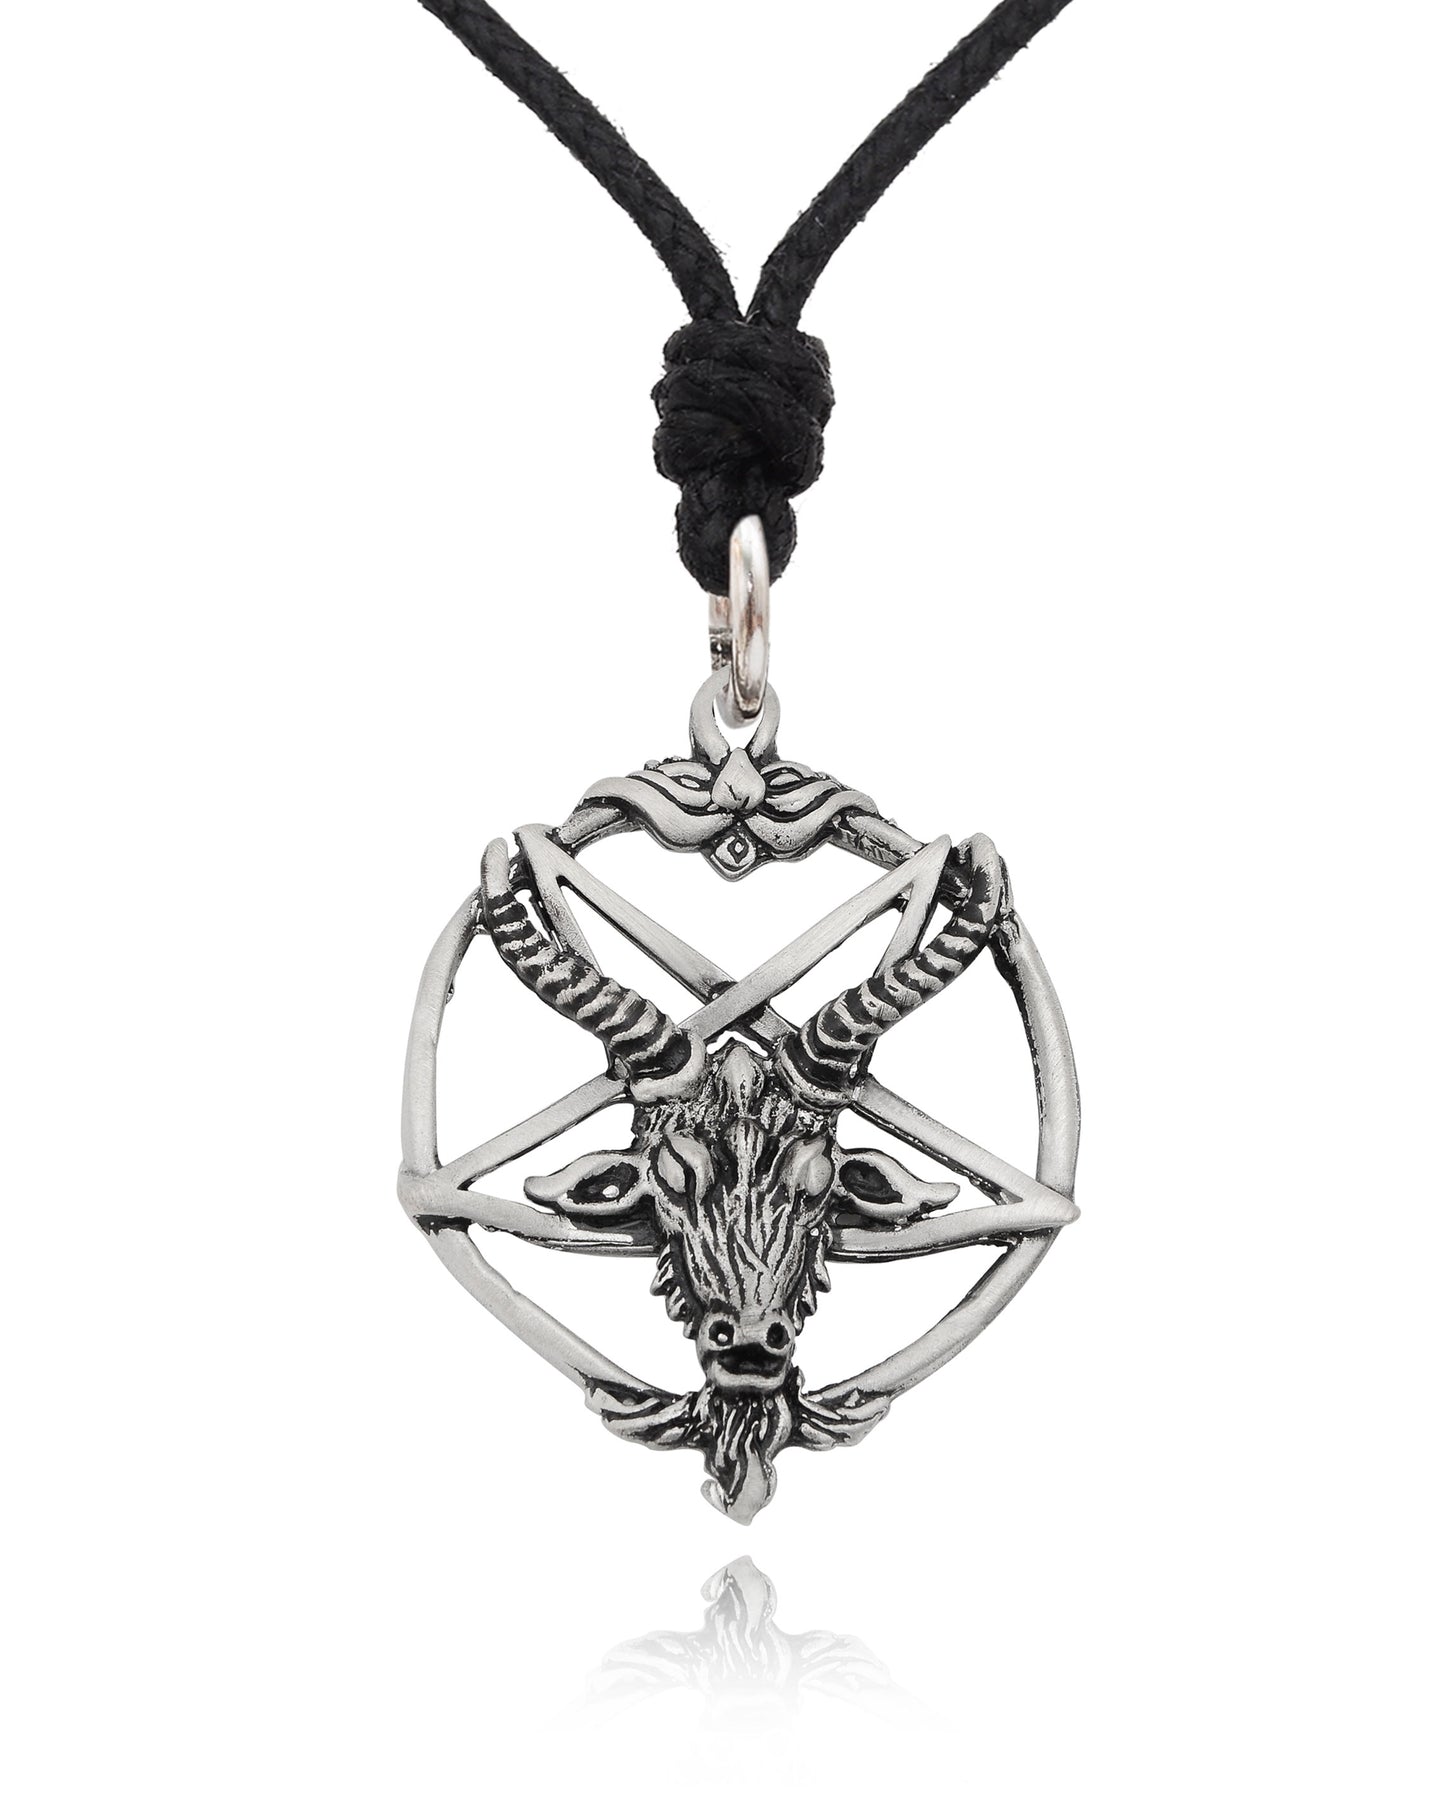 Goat Head Pentagram Star Silver Pewter Charm Necklace Pendant Jewelry